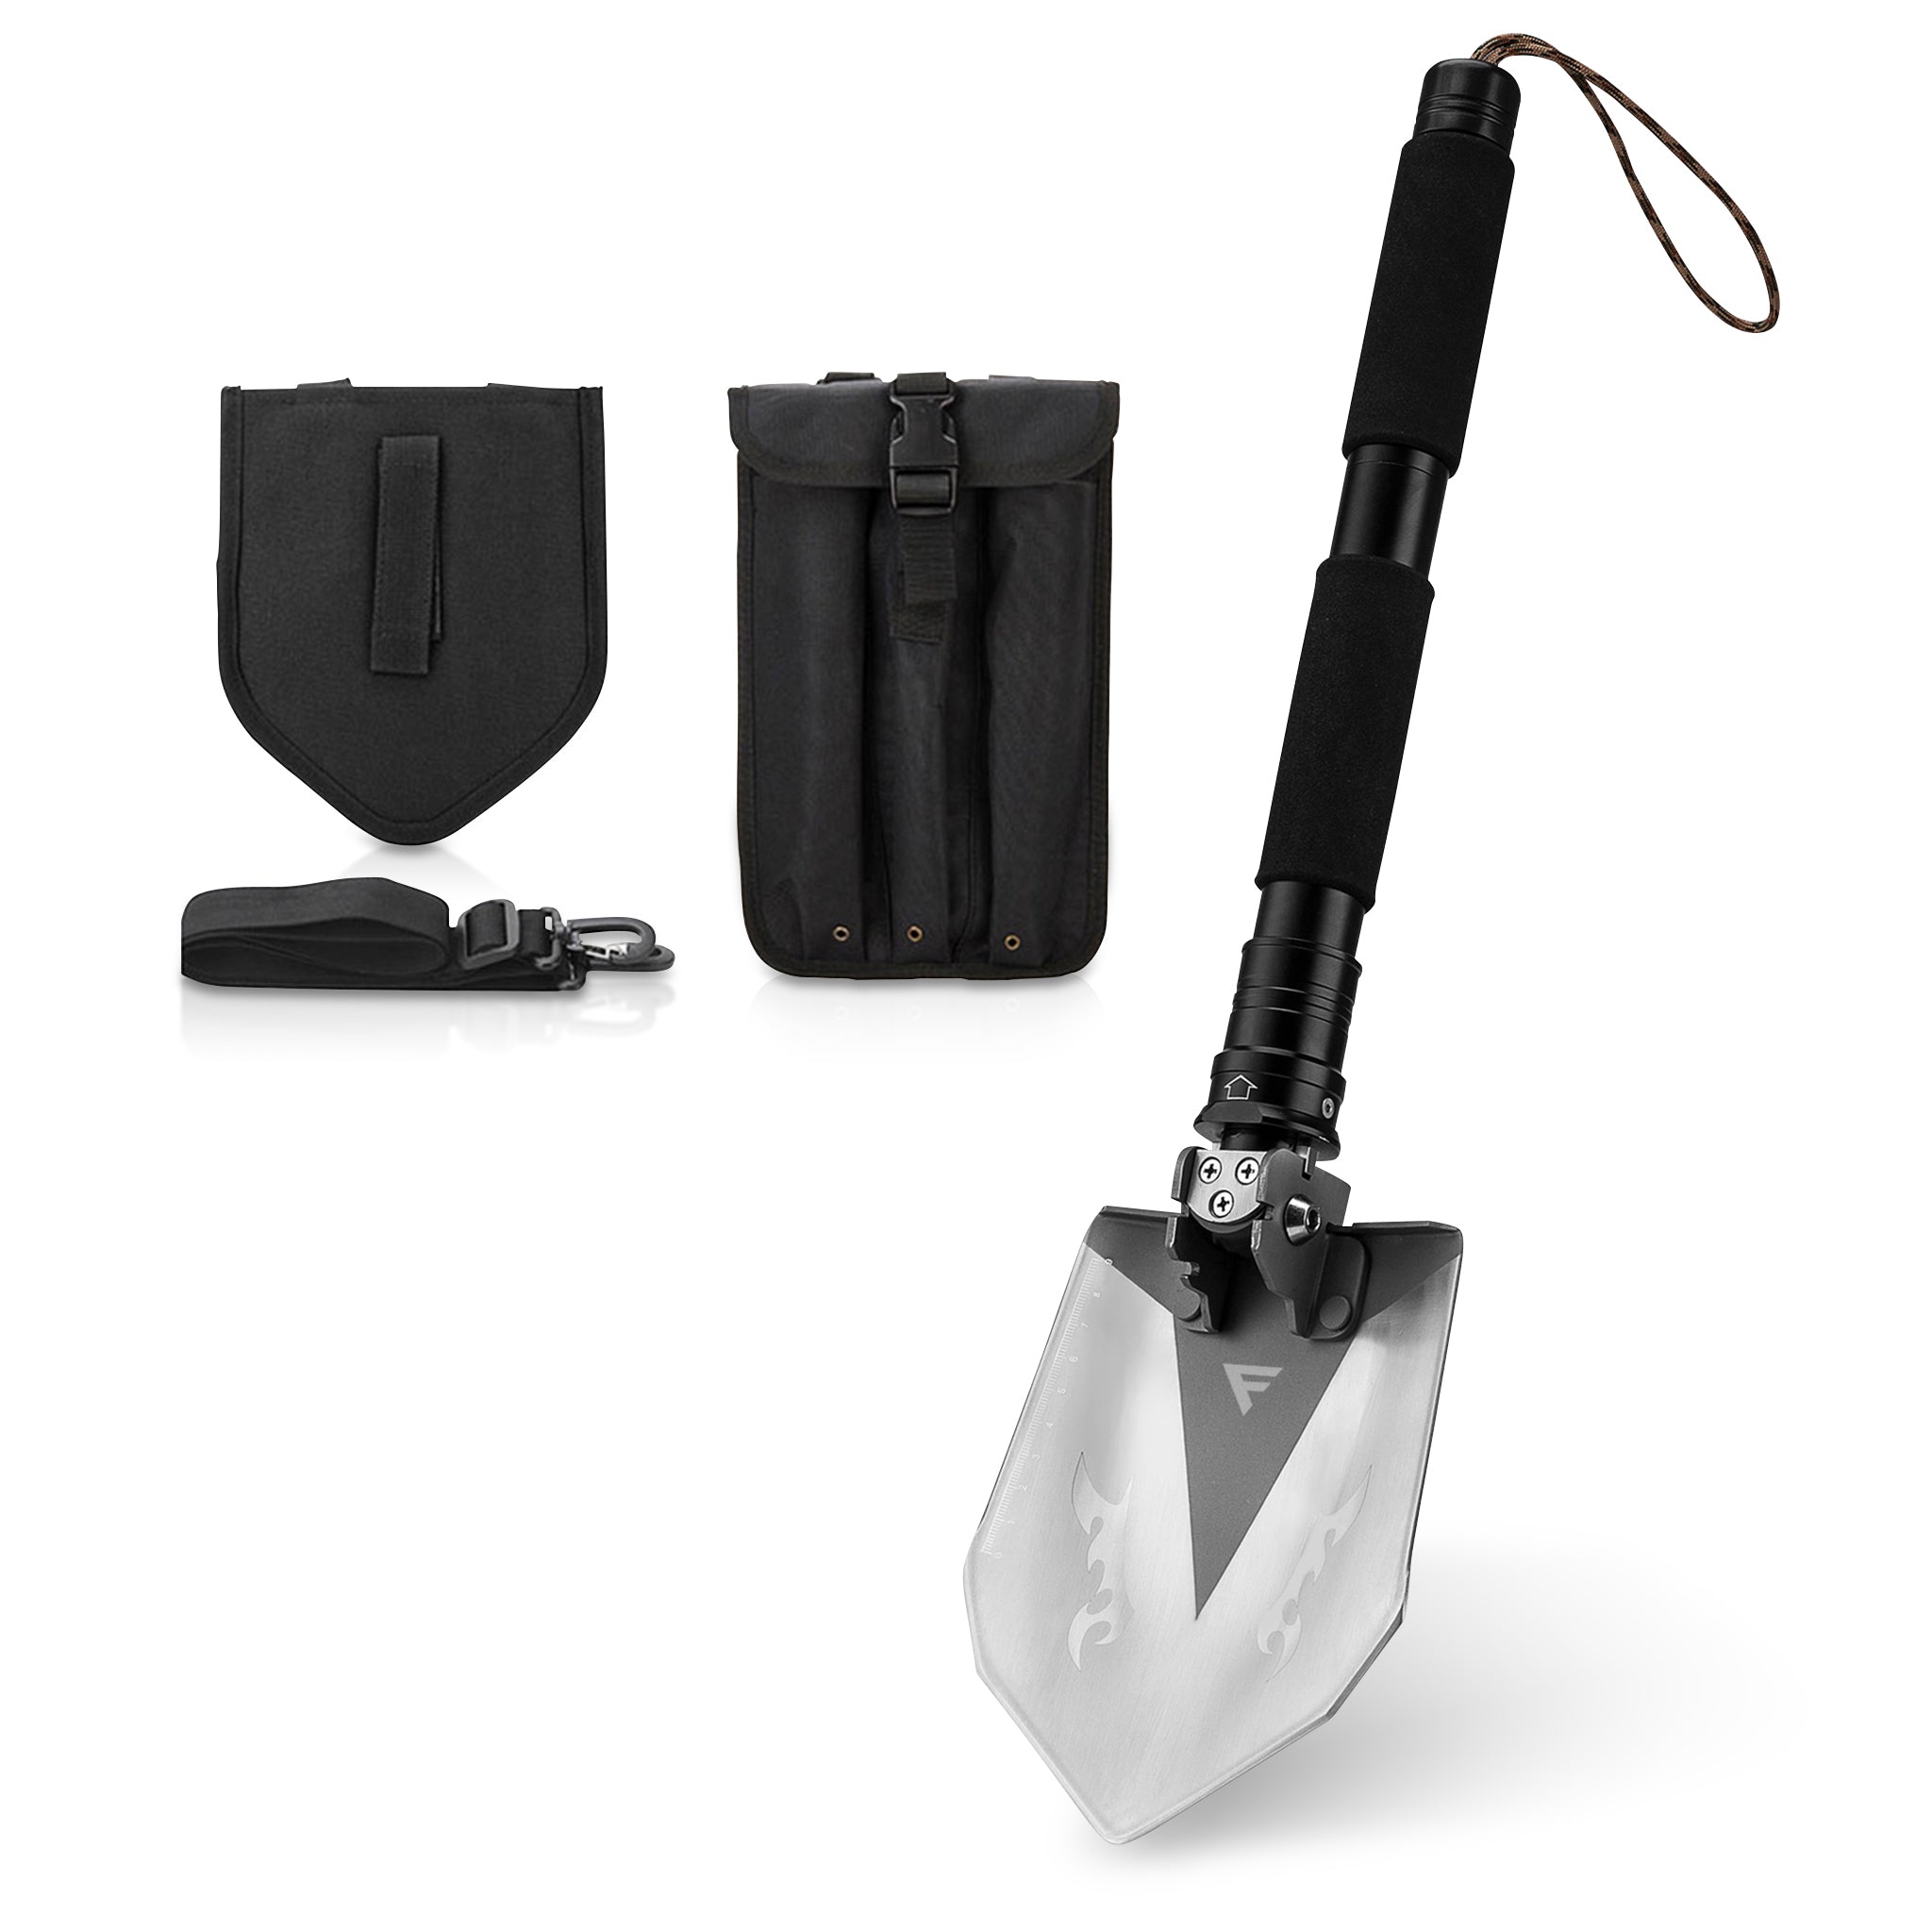 FiveJoy Military Folding Shovel Multitool (RS) to Keep in Vehicle for Emergency